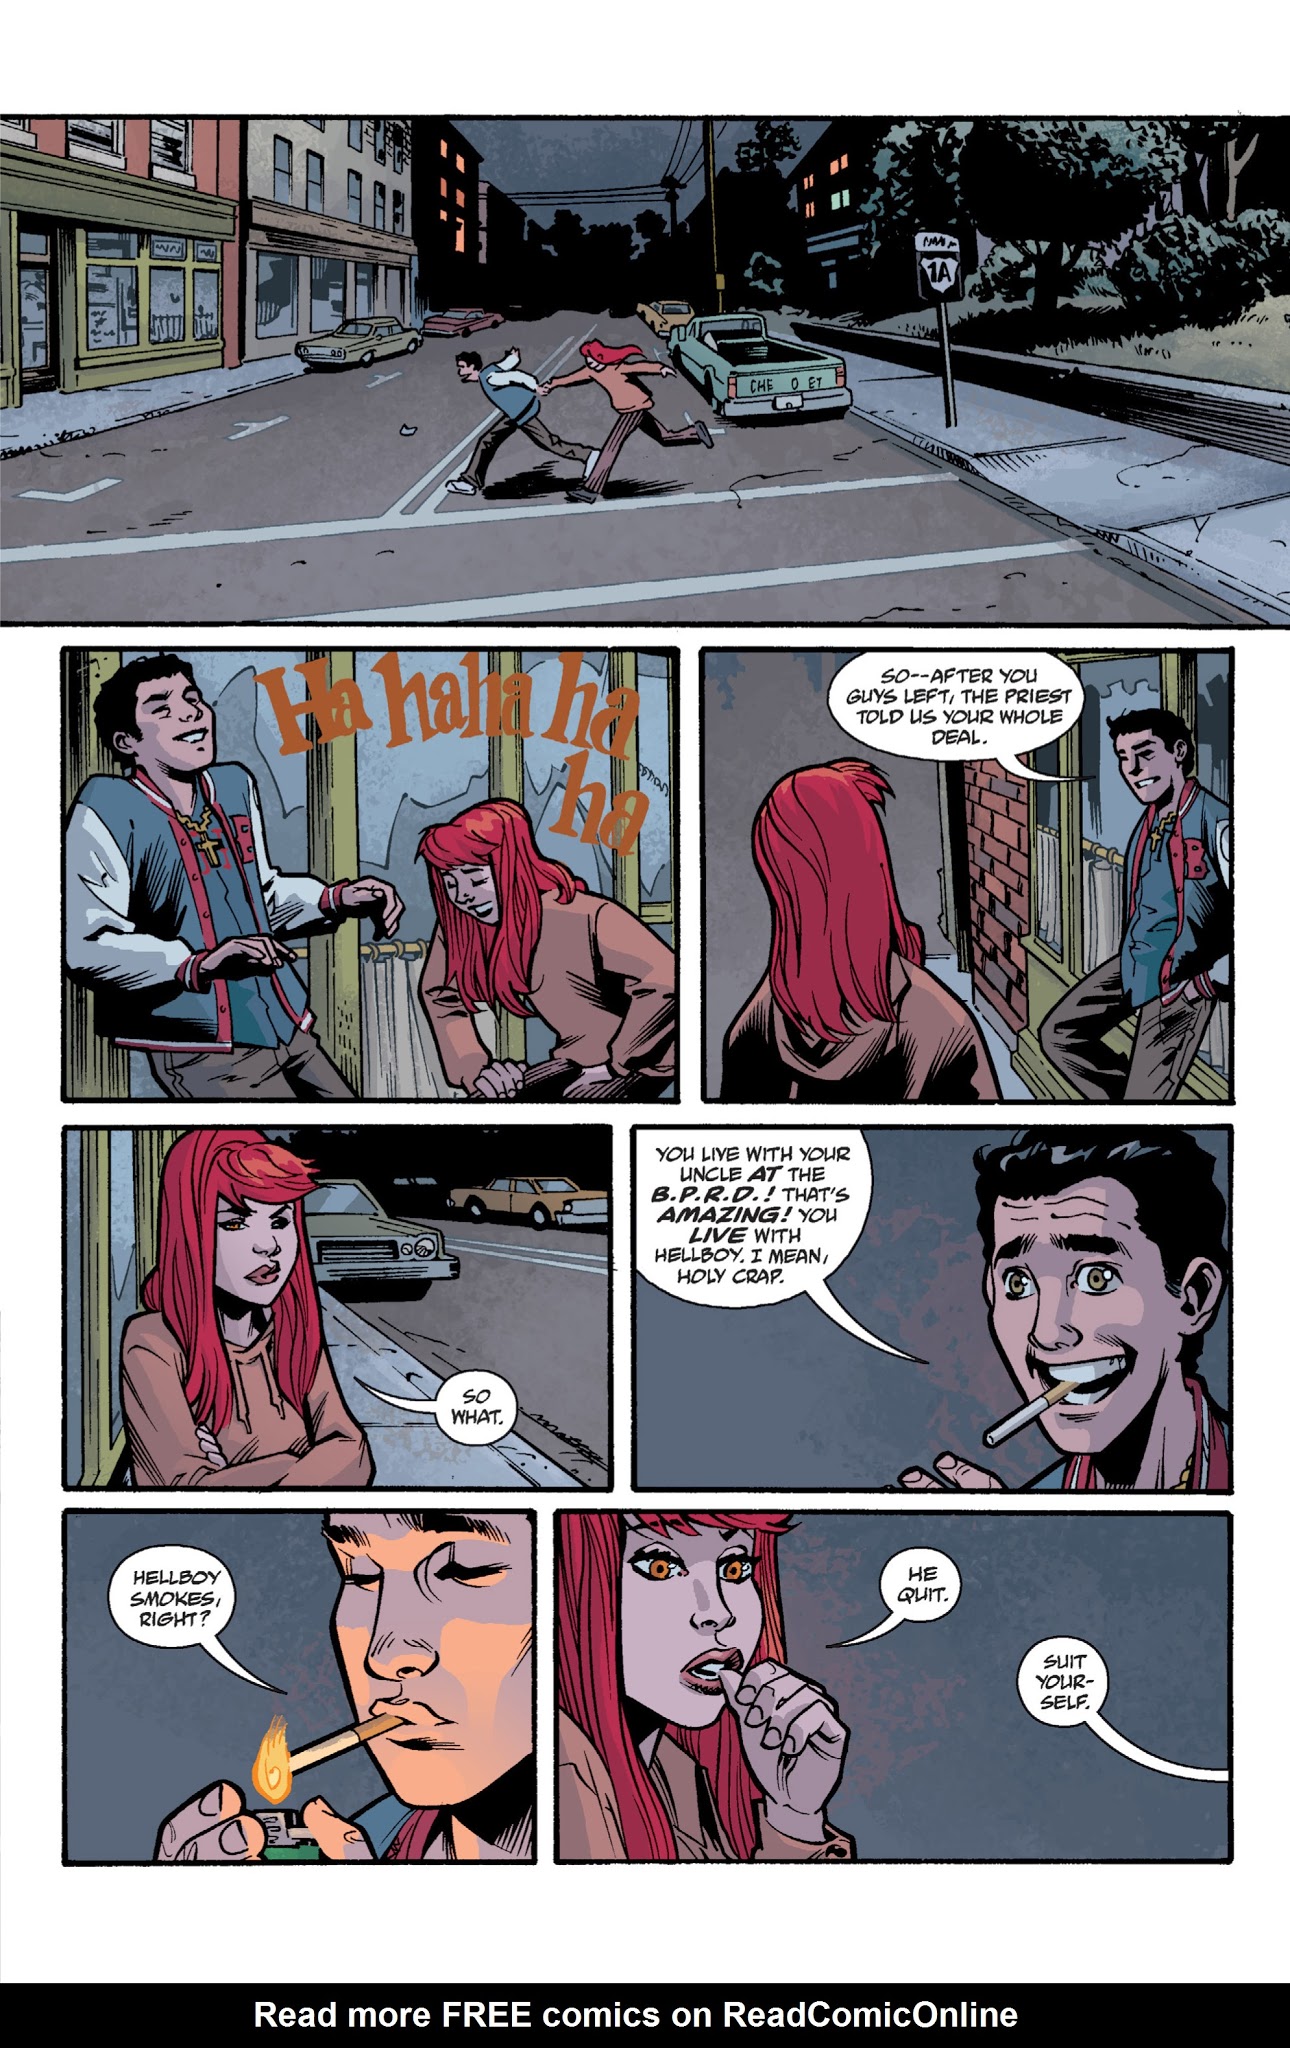 Read online B.P.R.D.: Being Human comic -  Issue # TPB - 37